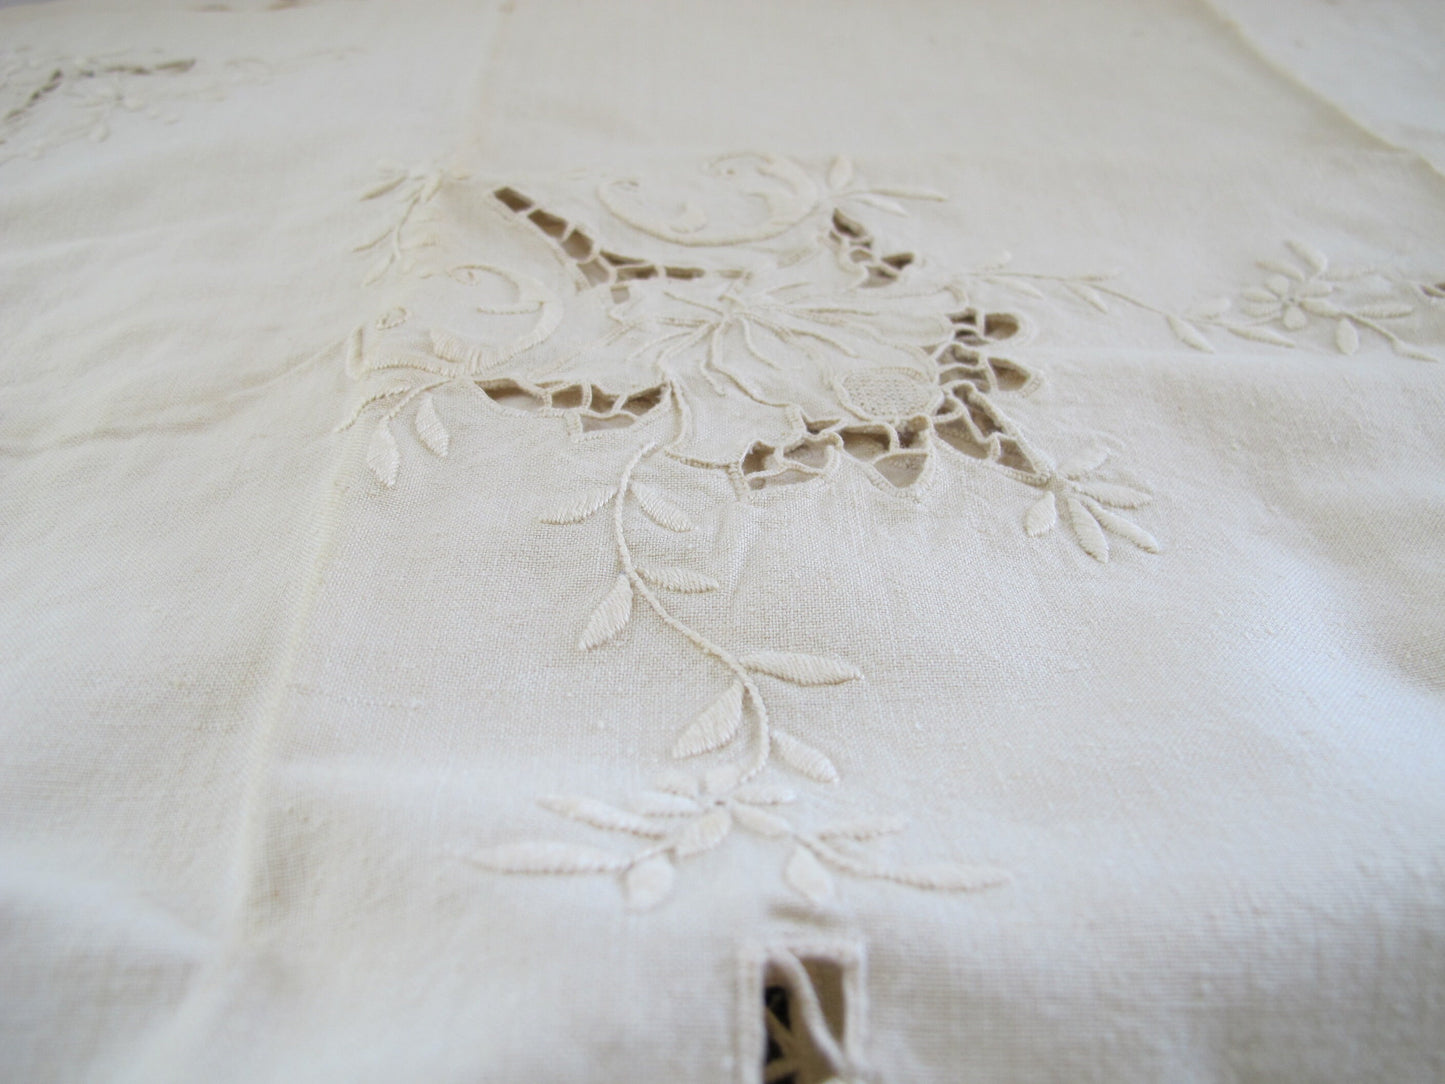 Luncheon Set Linens Textiles Tea Stained Edwardian Victorian 1900s 1910s